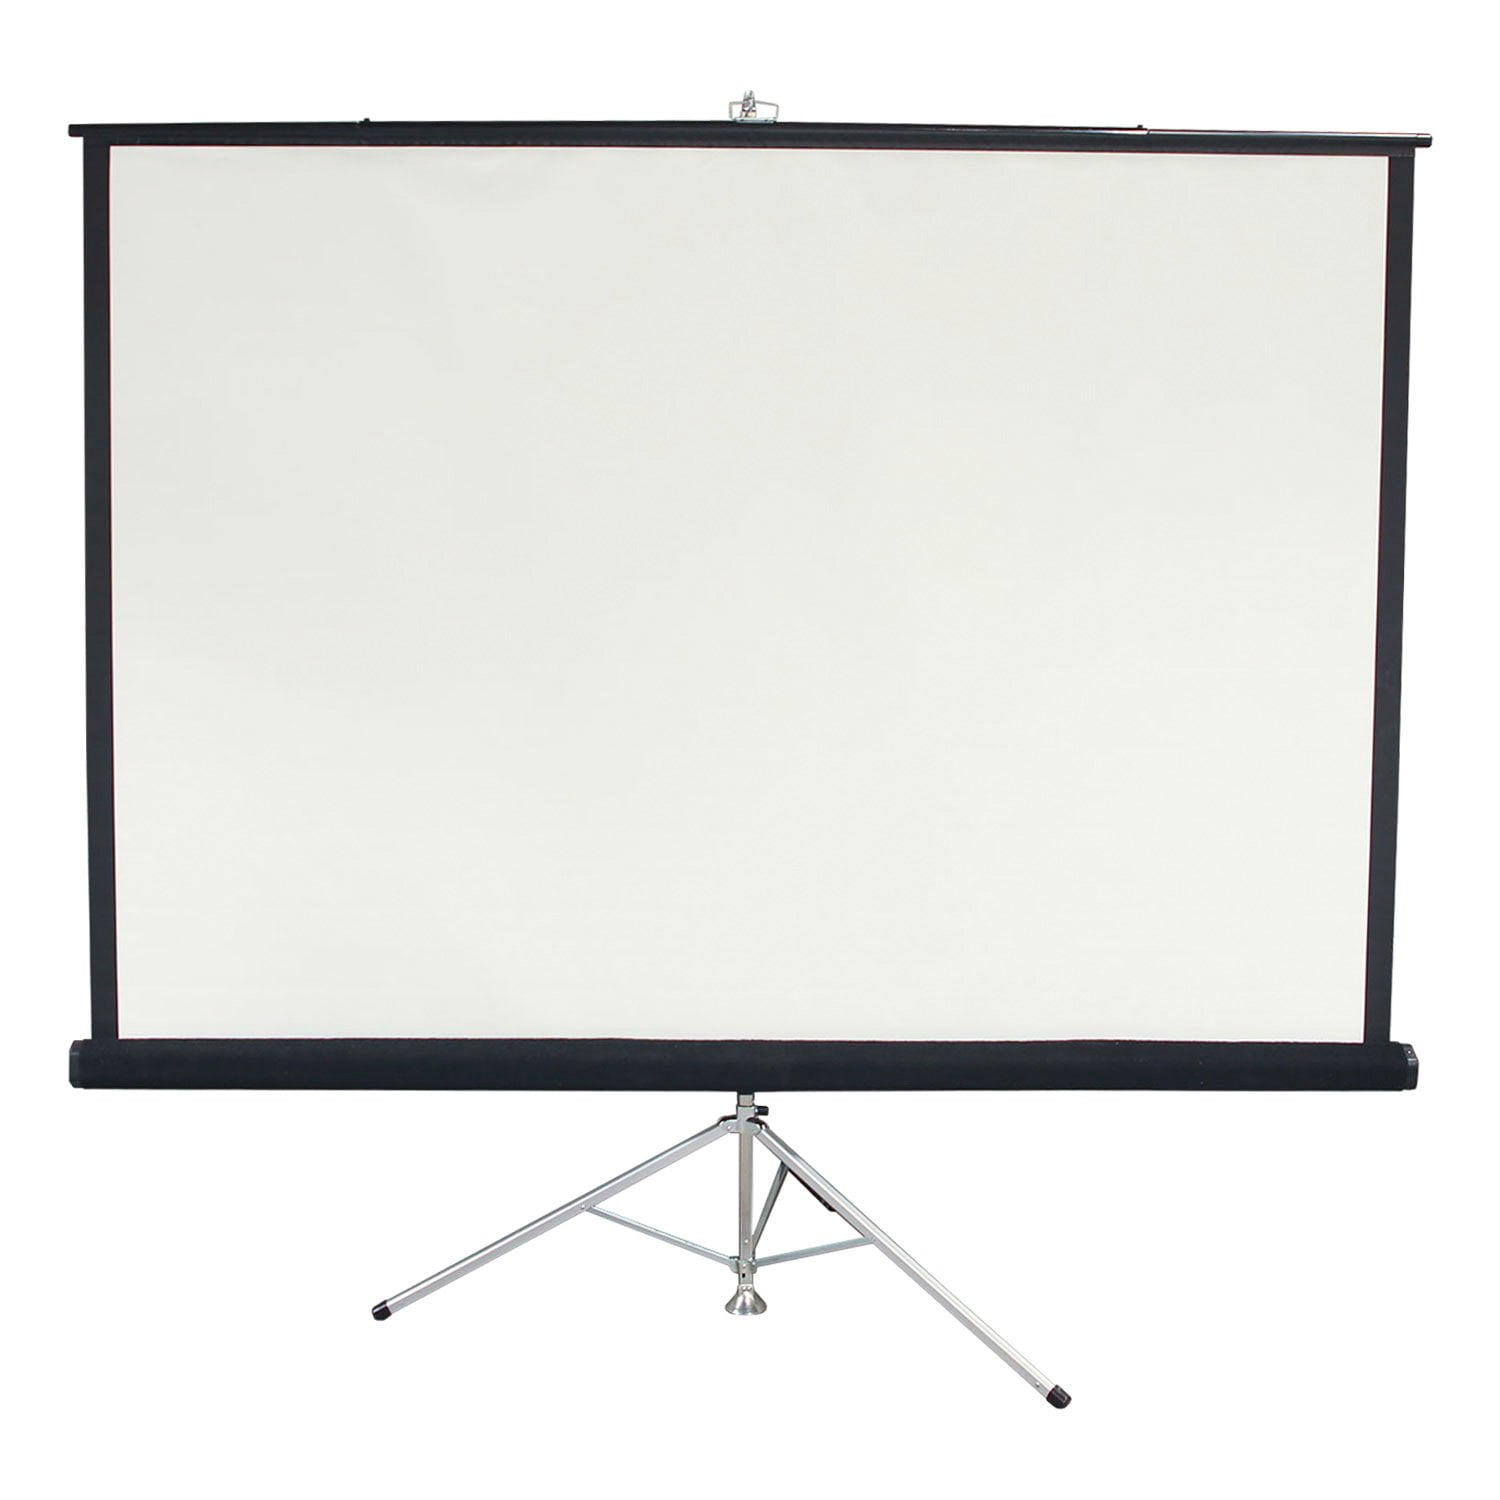 Used Projector Screen, Black and White